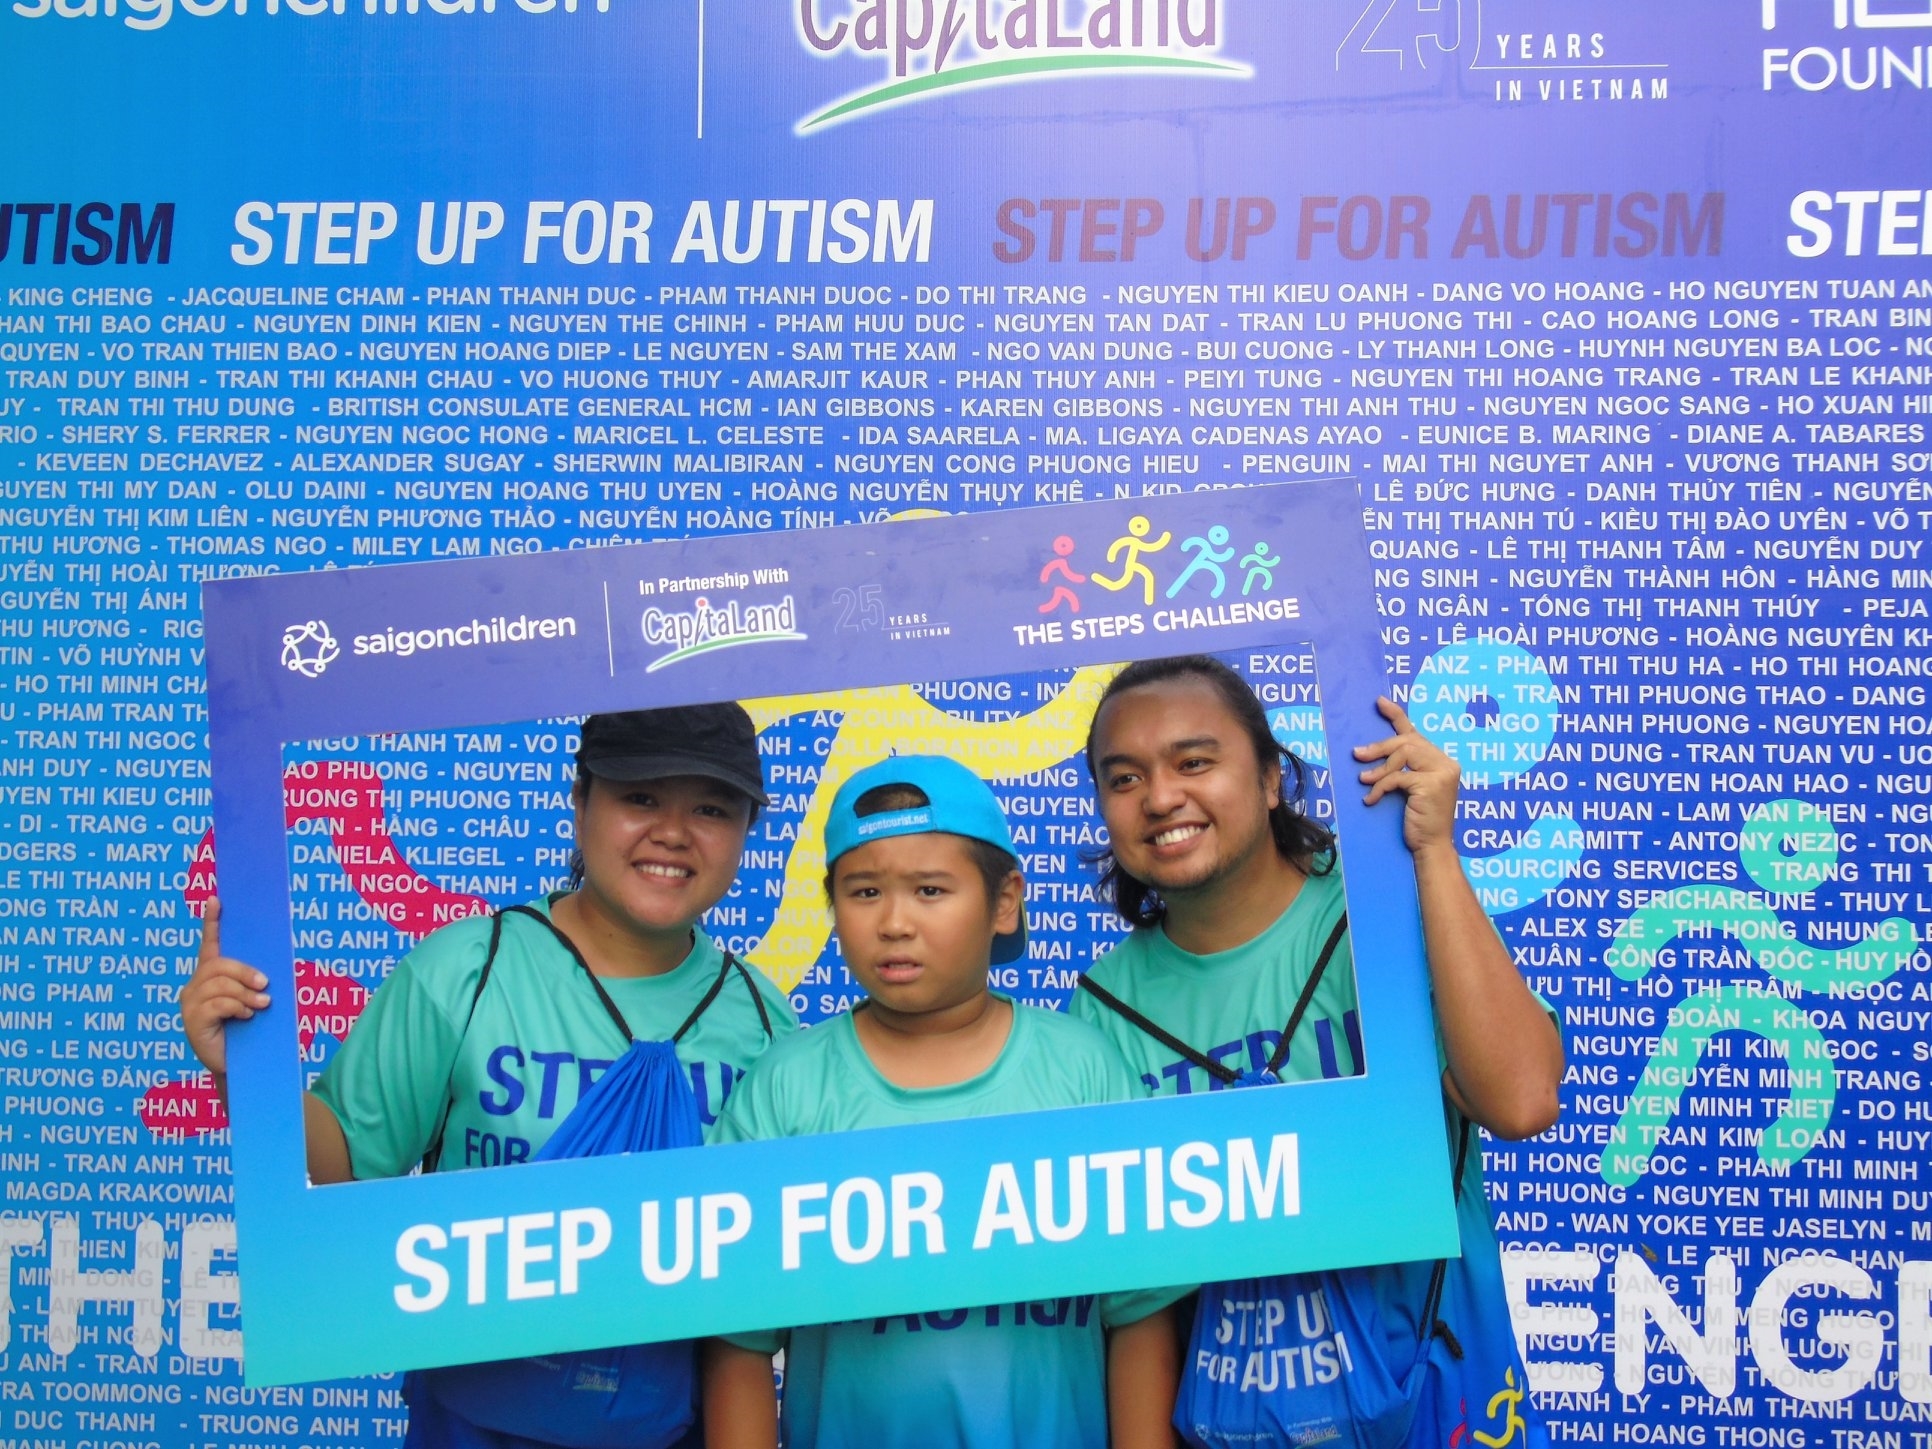 STEPS UP FOR CHILDREN WITH AUTISM